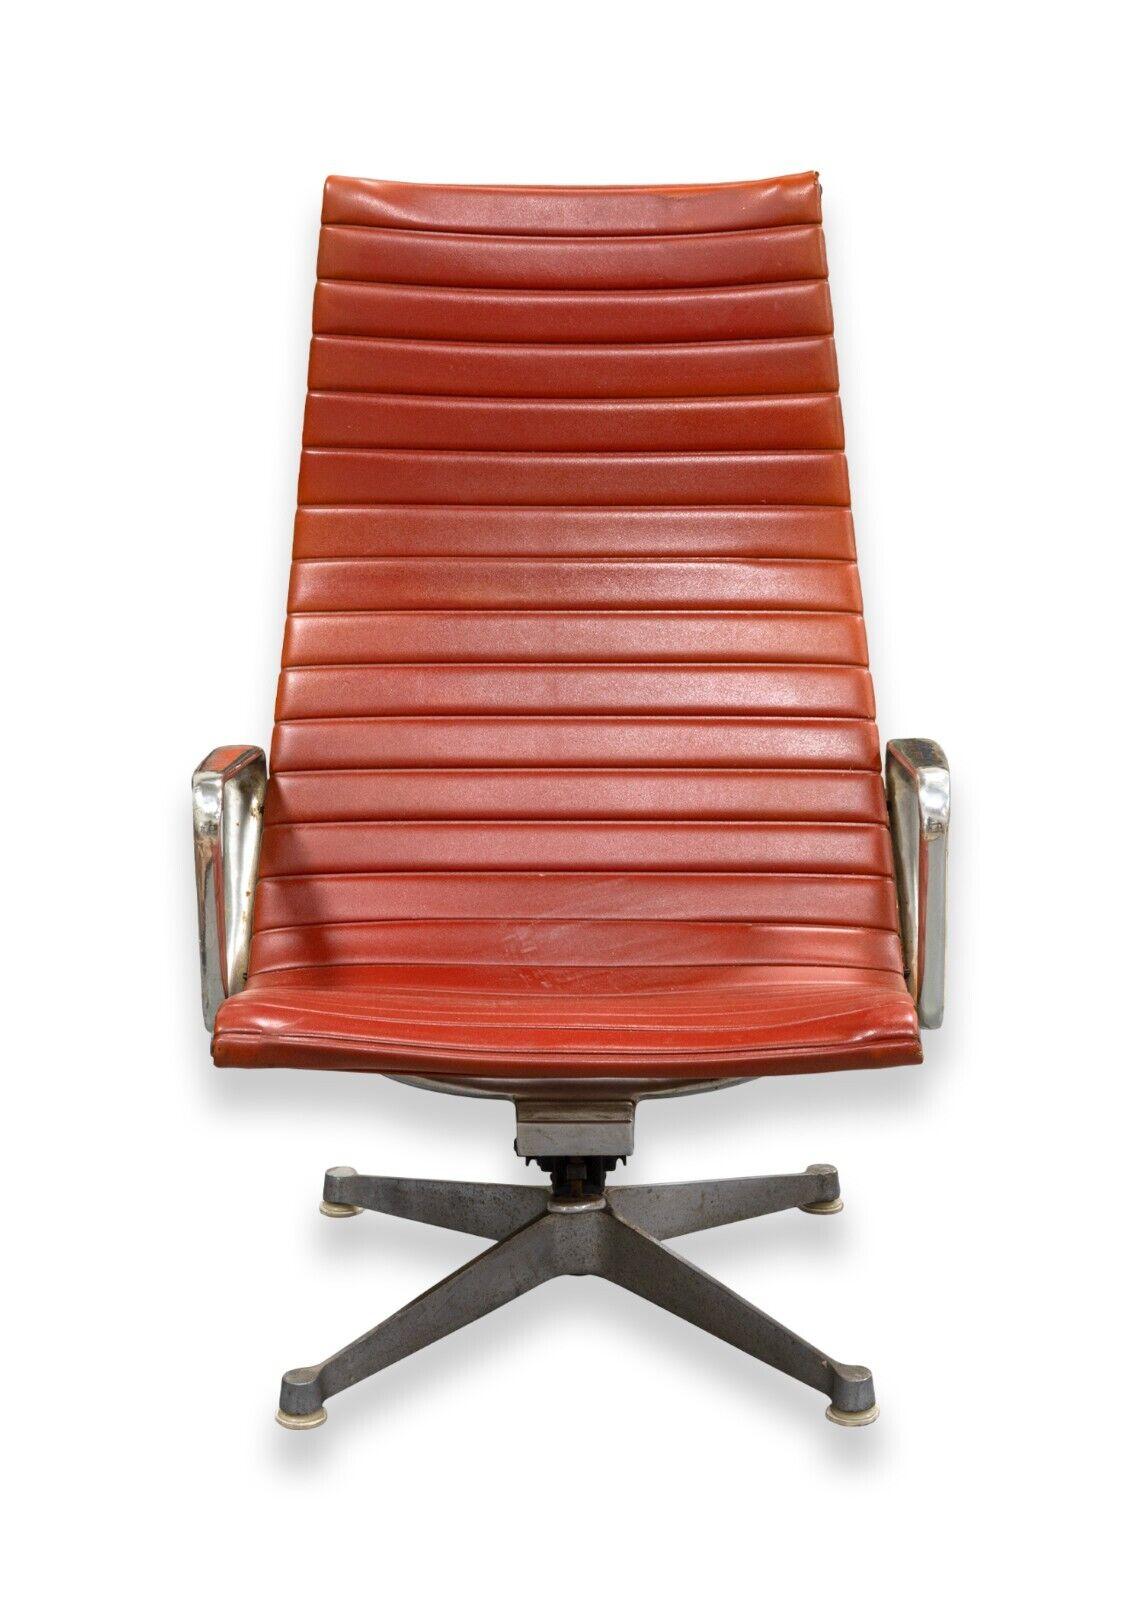 A mid century modern early Eames for Herman Miller aluminum group swivel office chair. A lovely red Eames office chair for Herman Miller. This chair features an iconic early Eames design. This chair features an adjustable seat, arm rests, four